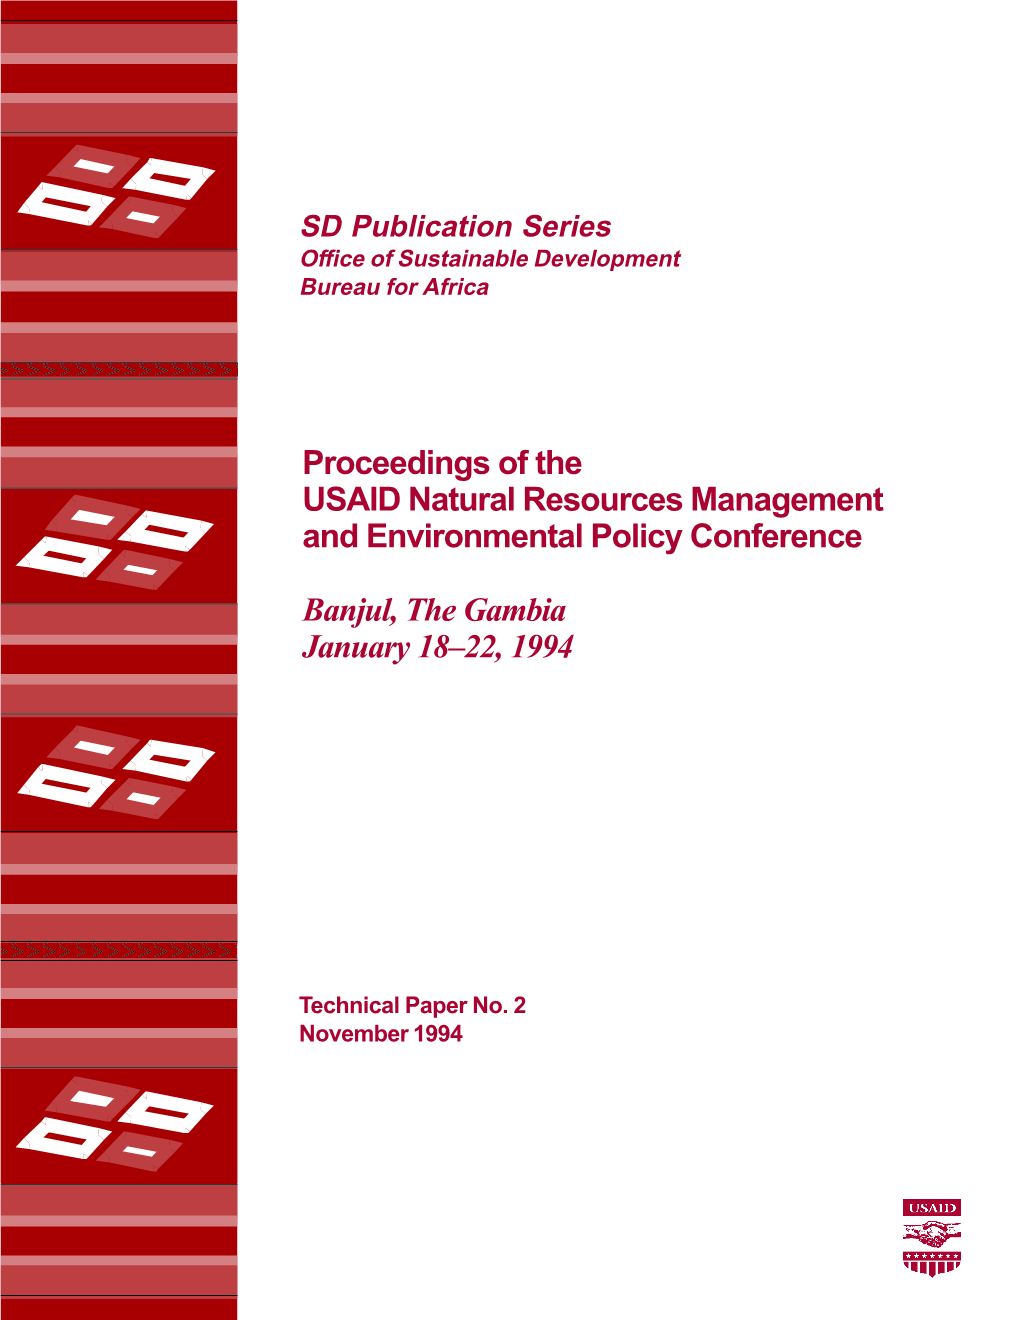 Proceedings of the USAID Natural Resources Management and Environmental Policy Conference